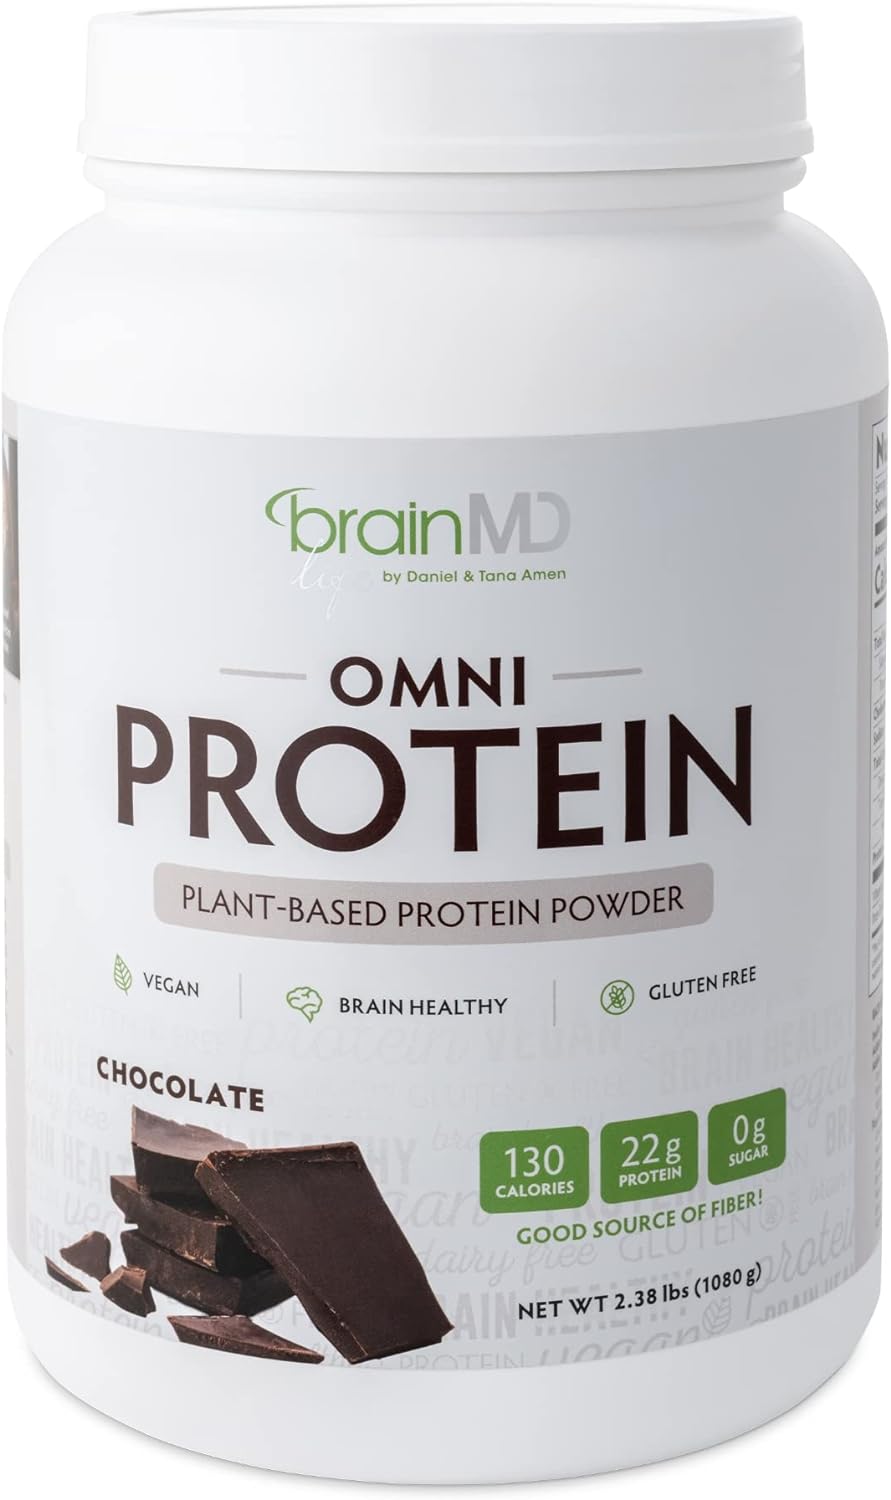 BRAINMD Dr Amen Omni Protein Chocolate - 2.38 lbs - Plant-Based Protei